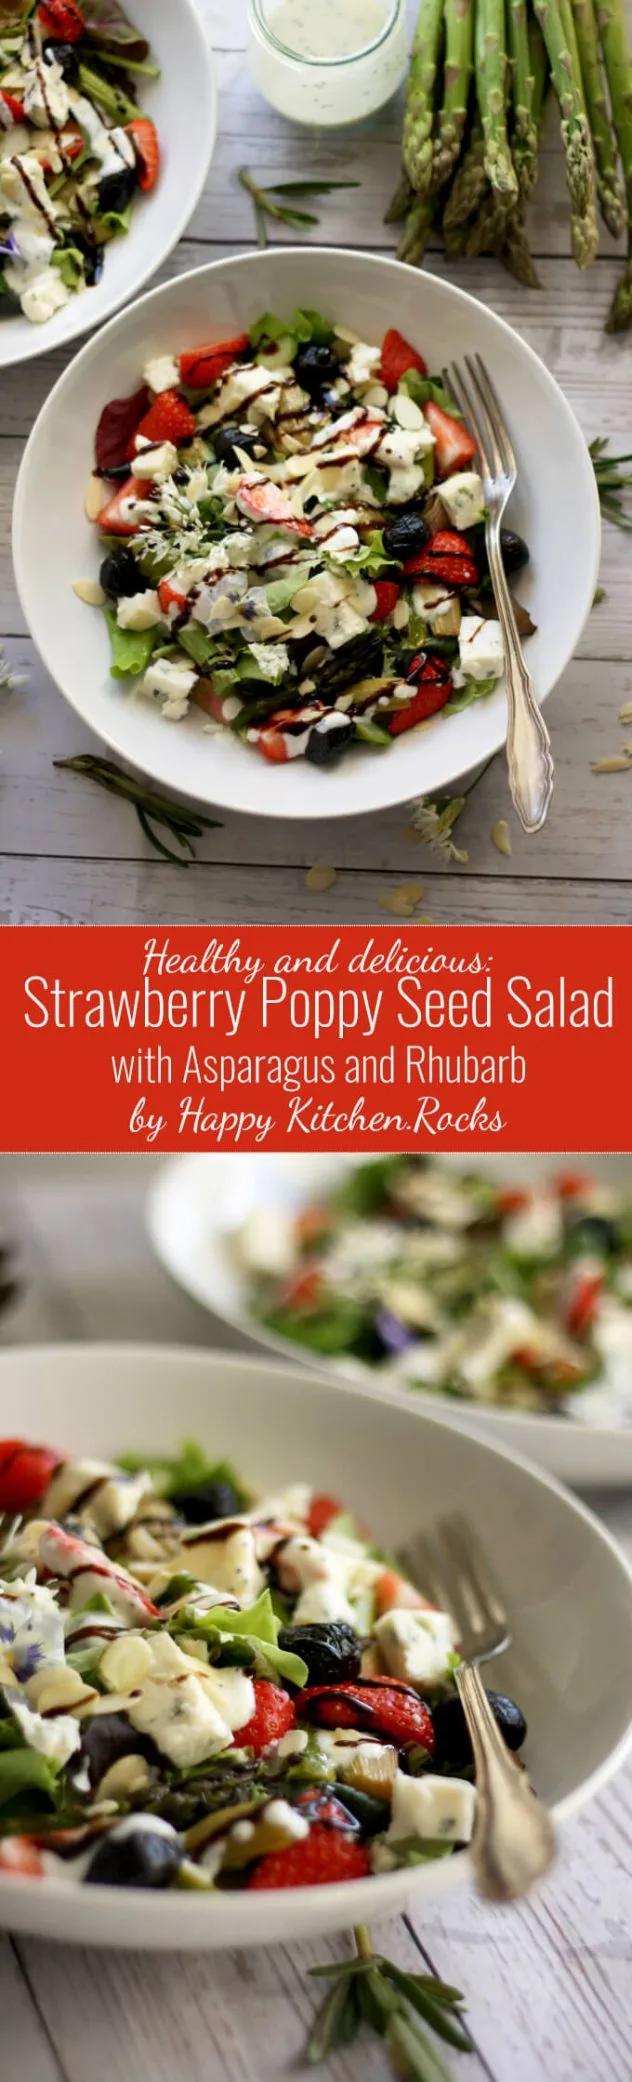 Spring Strawberry Poppy Seed Salad with roasted asparagus, rhubarb, gorgonzola cheese, olives and almonds is incredibly delicious, healthy and takes no more than 30 minutes to make! Perfect for light lunch! Low carb and vegetarian.